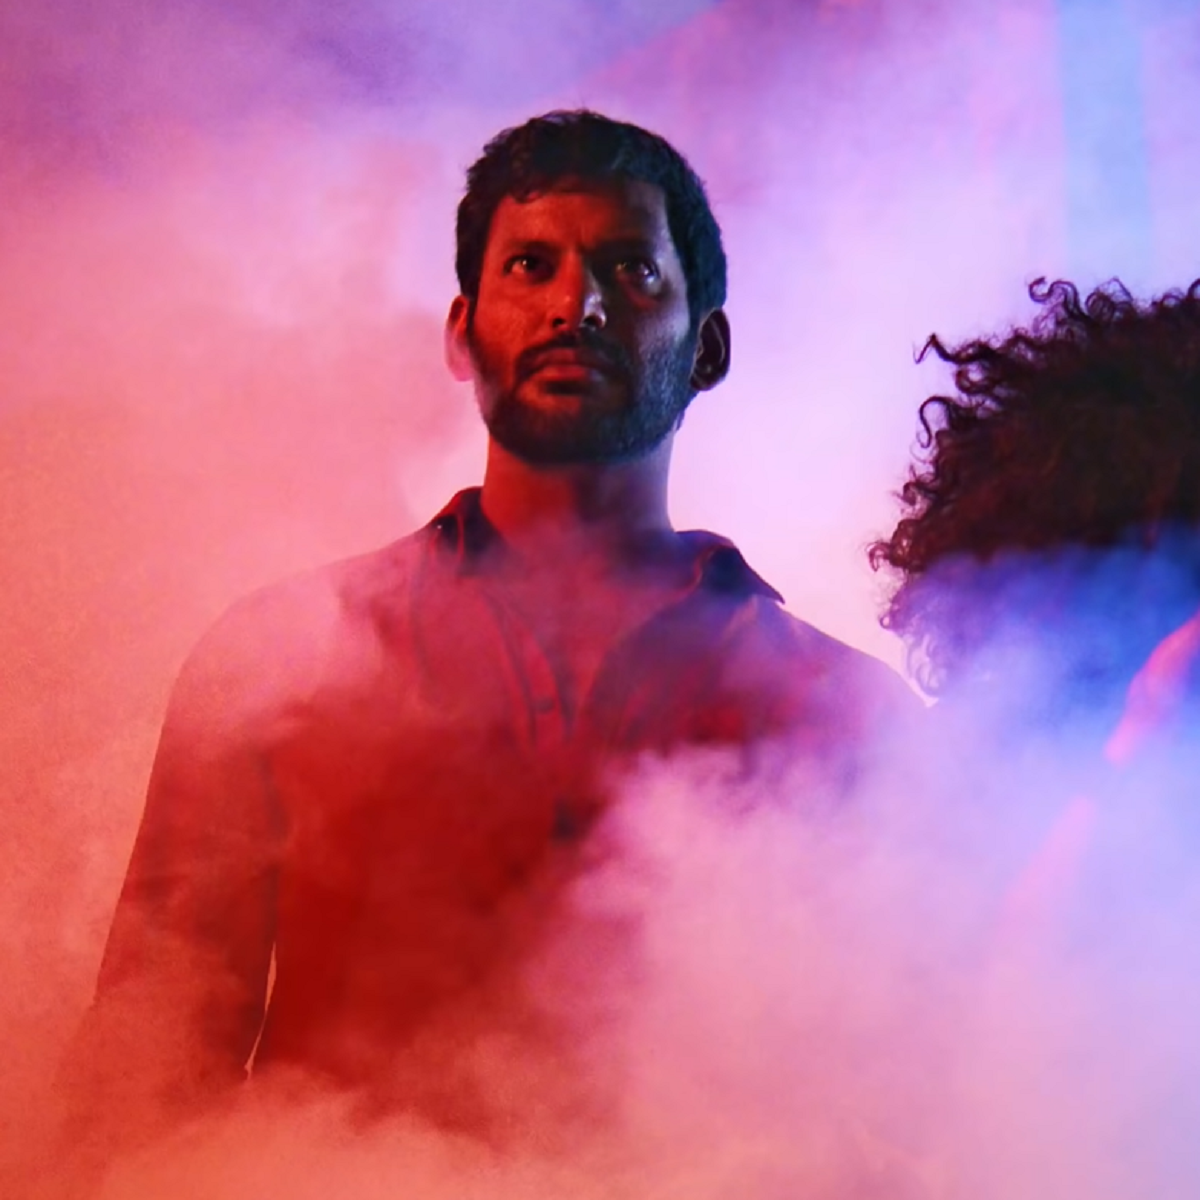 Box Office: Vishal's Veerame Vaagai Soodum disappoints with a 7 crores opening weekend